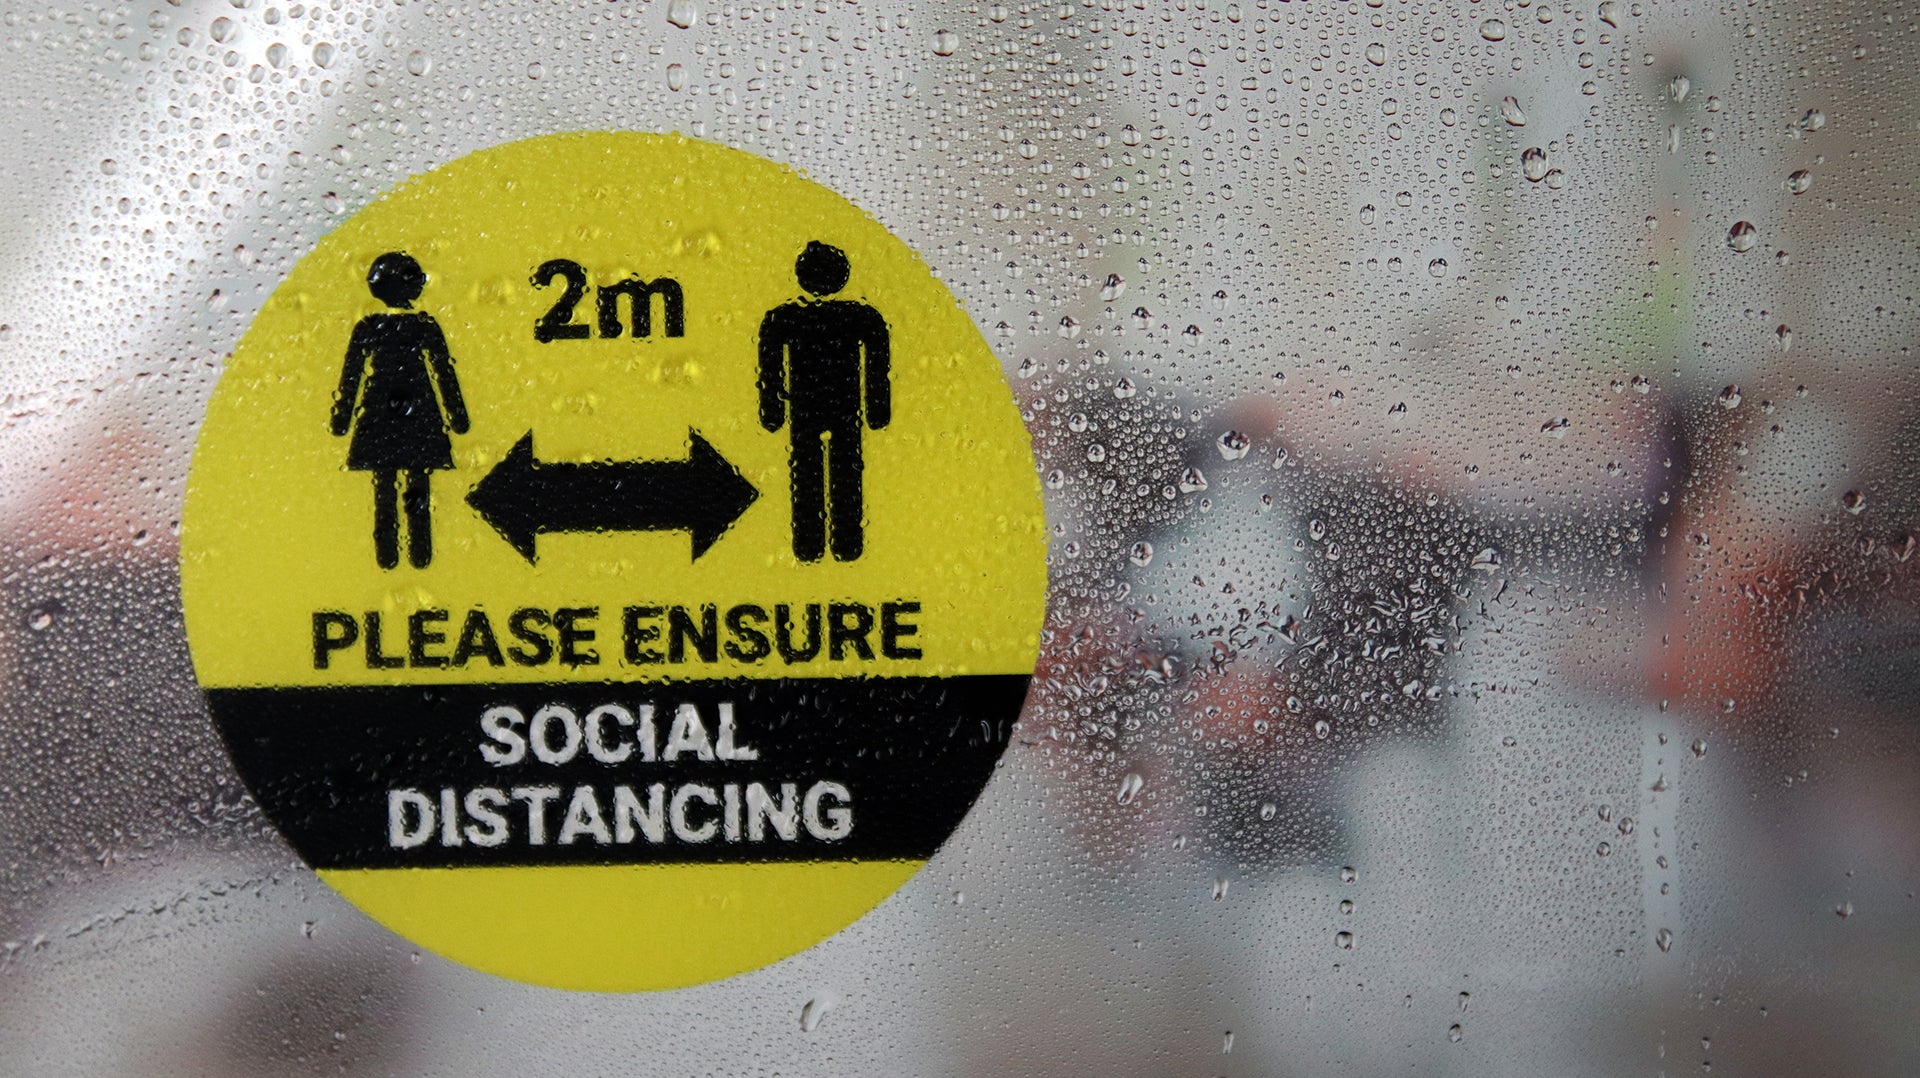 Social distancing window label front adhesive circle shape applied to a window